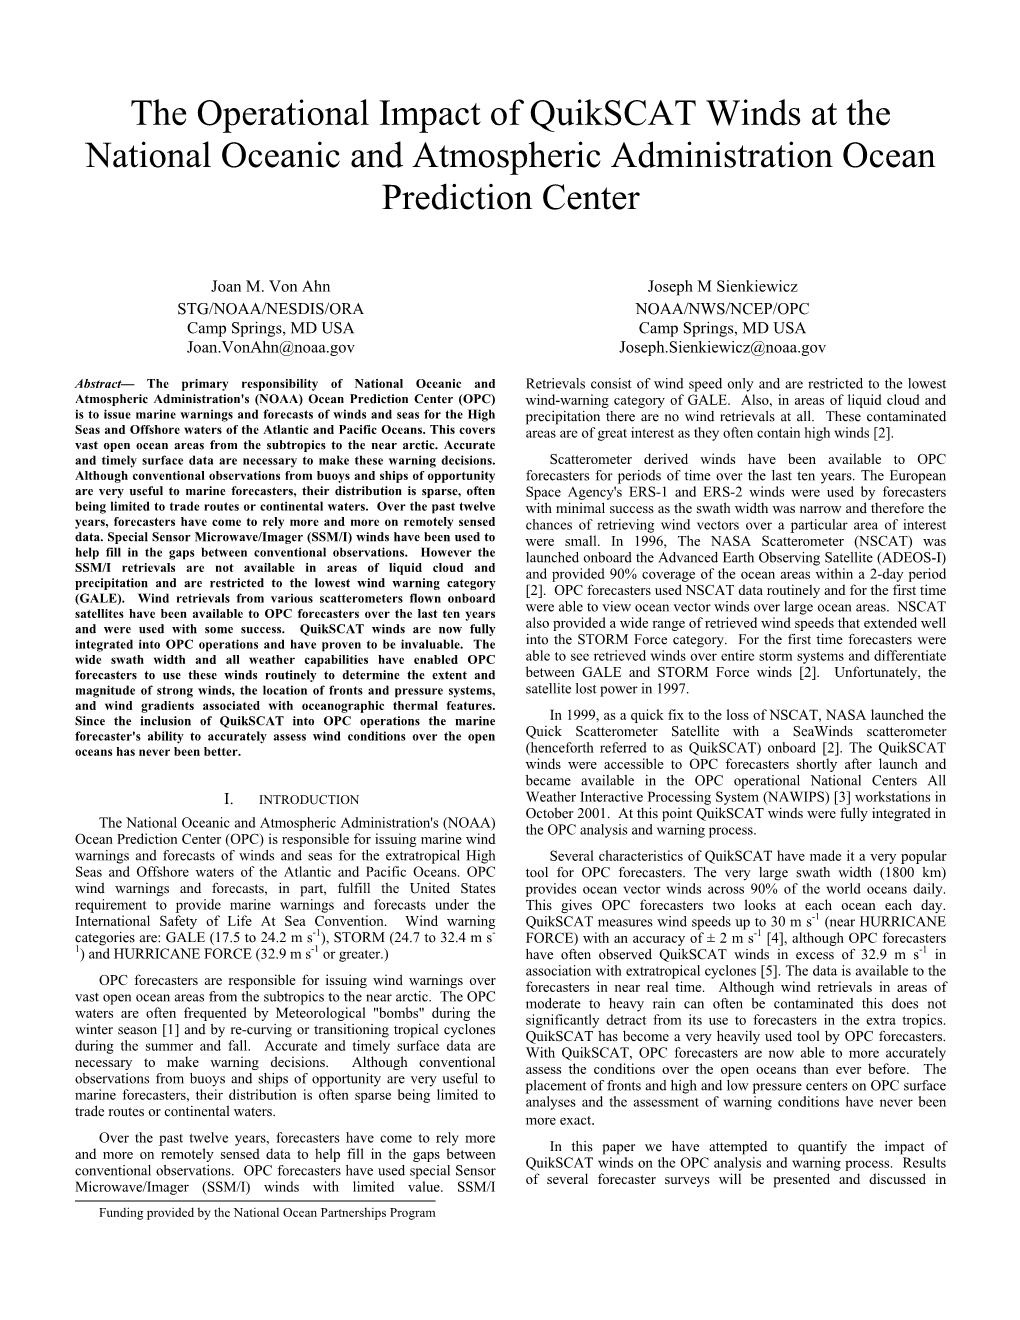 The Operational Impact of Quikscat Winds at the National Oceanic and Atmospheric Administration Ocean Prediction Center